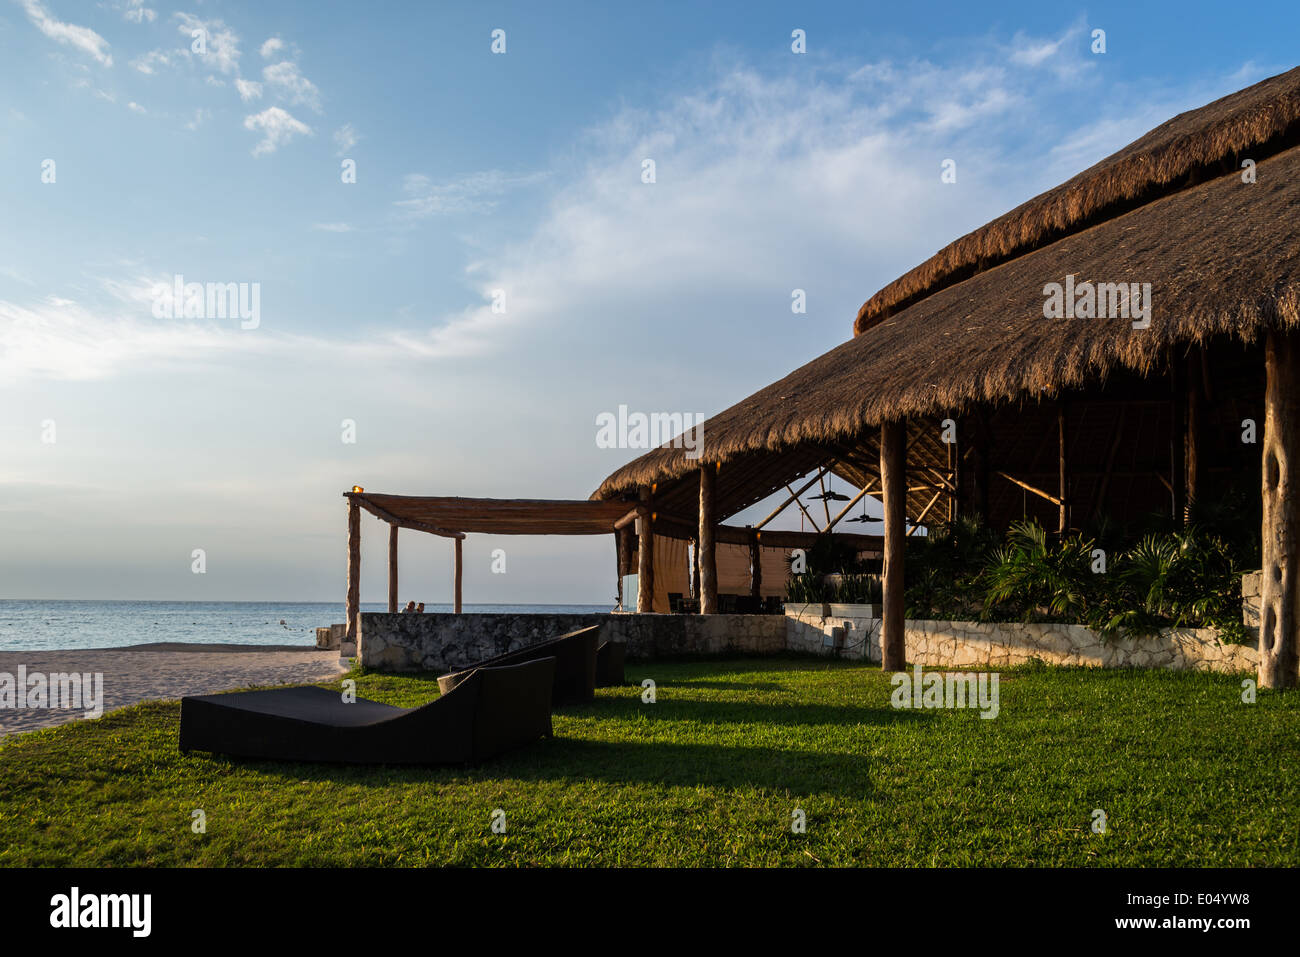 An beach-front open-air restaurant at a resort. Cozumel, Mexico. Stock Photo